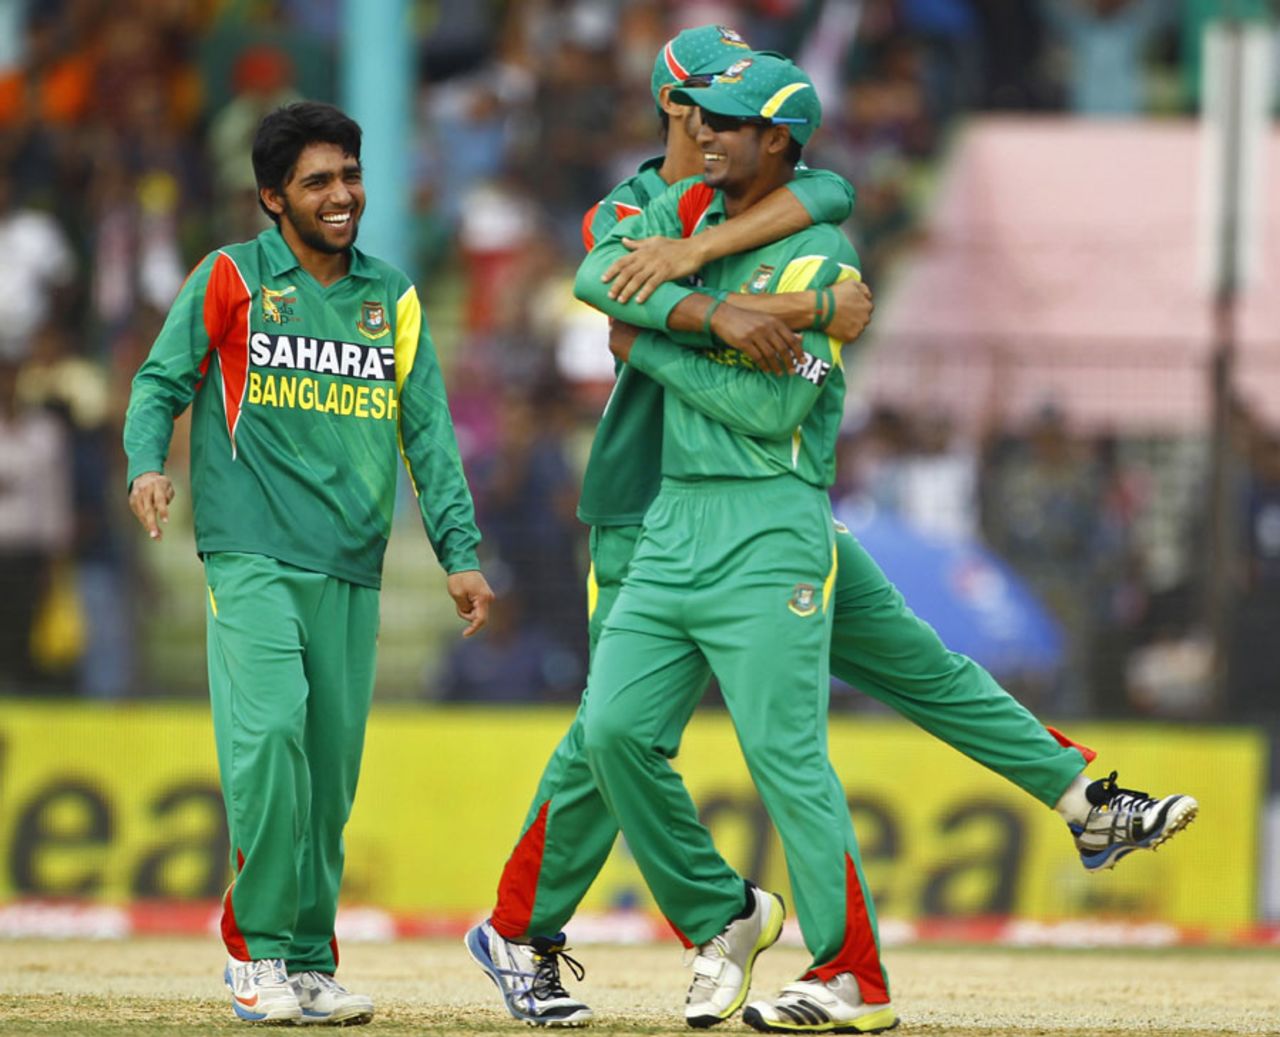 Mominul Haque is congratulated after a wicket, Bangladesh v Afghanistan, Asia Cup, Fatullah, March 1, 2014